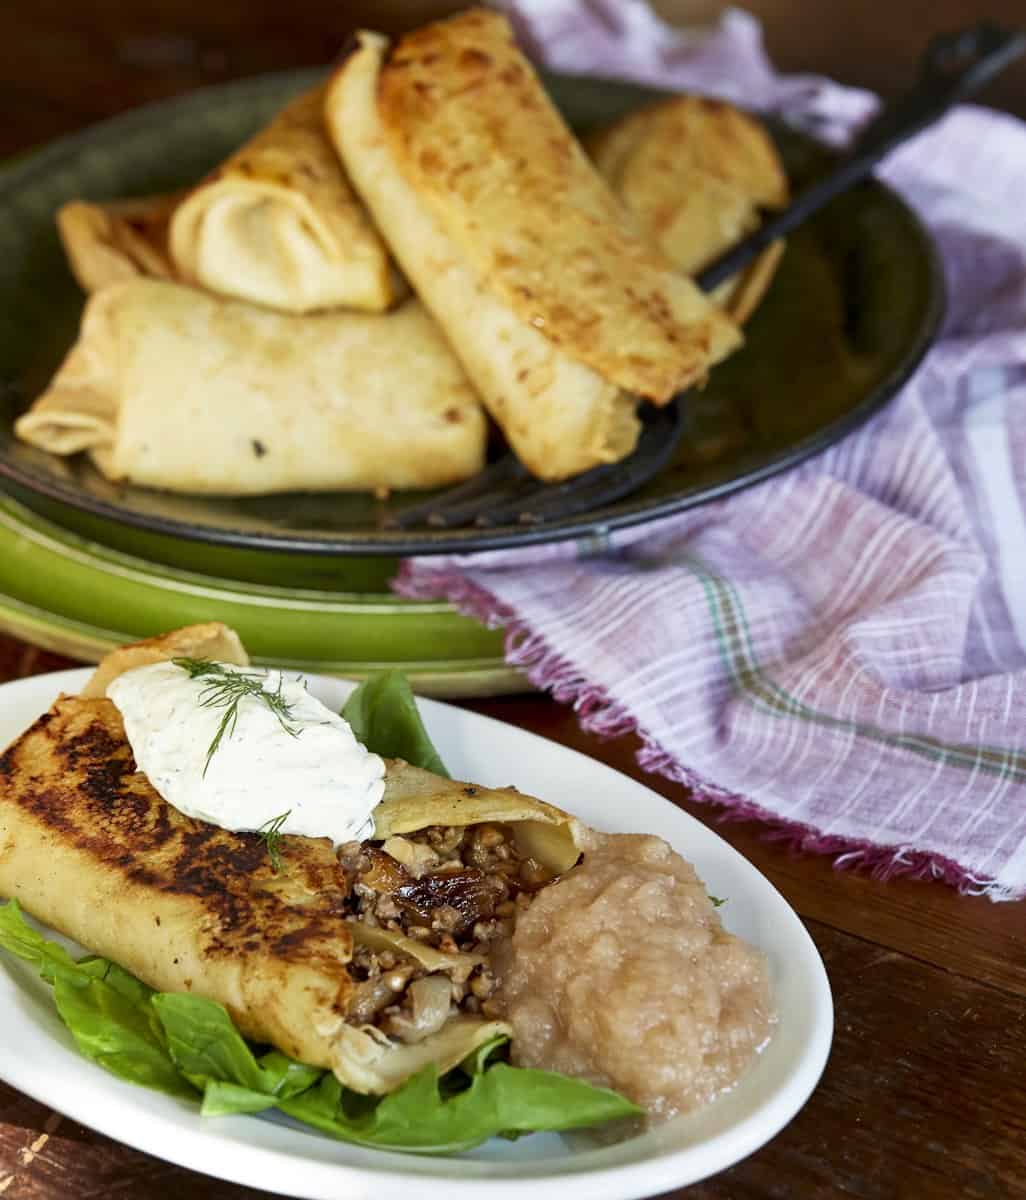 A plate of kasha blintzes on a table during a cooking class.